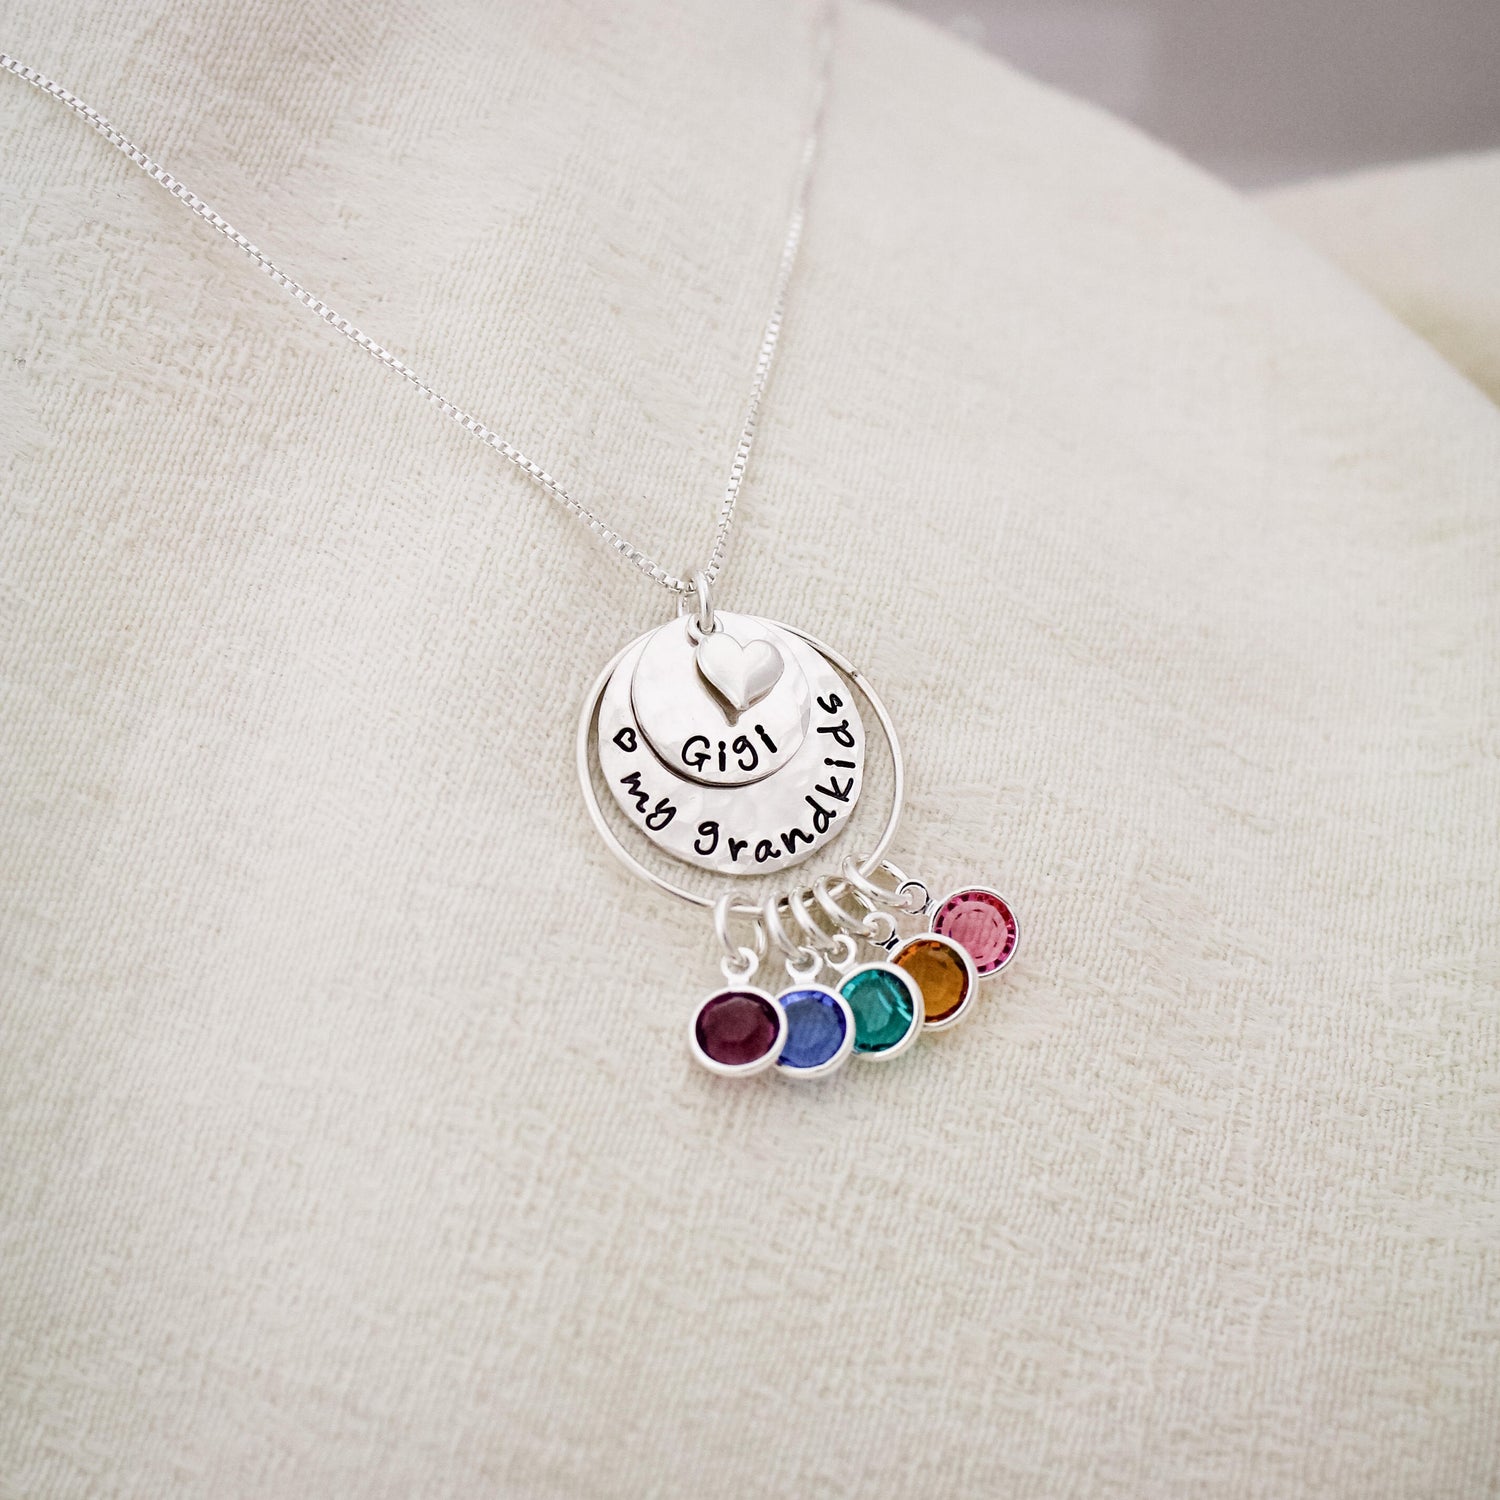 Personalized Grandma Necklace, Grandmother Necklace, Birthstone Necklace, Love my Grandchildren Necklace, Hand Stamped, Mother's Day Gift